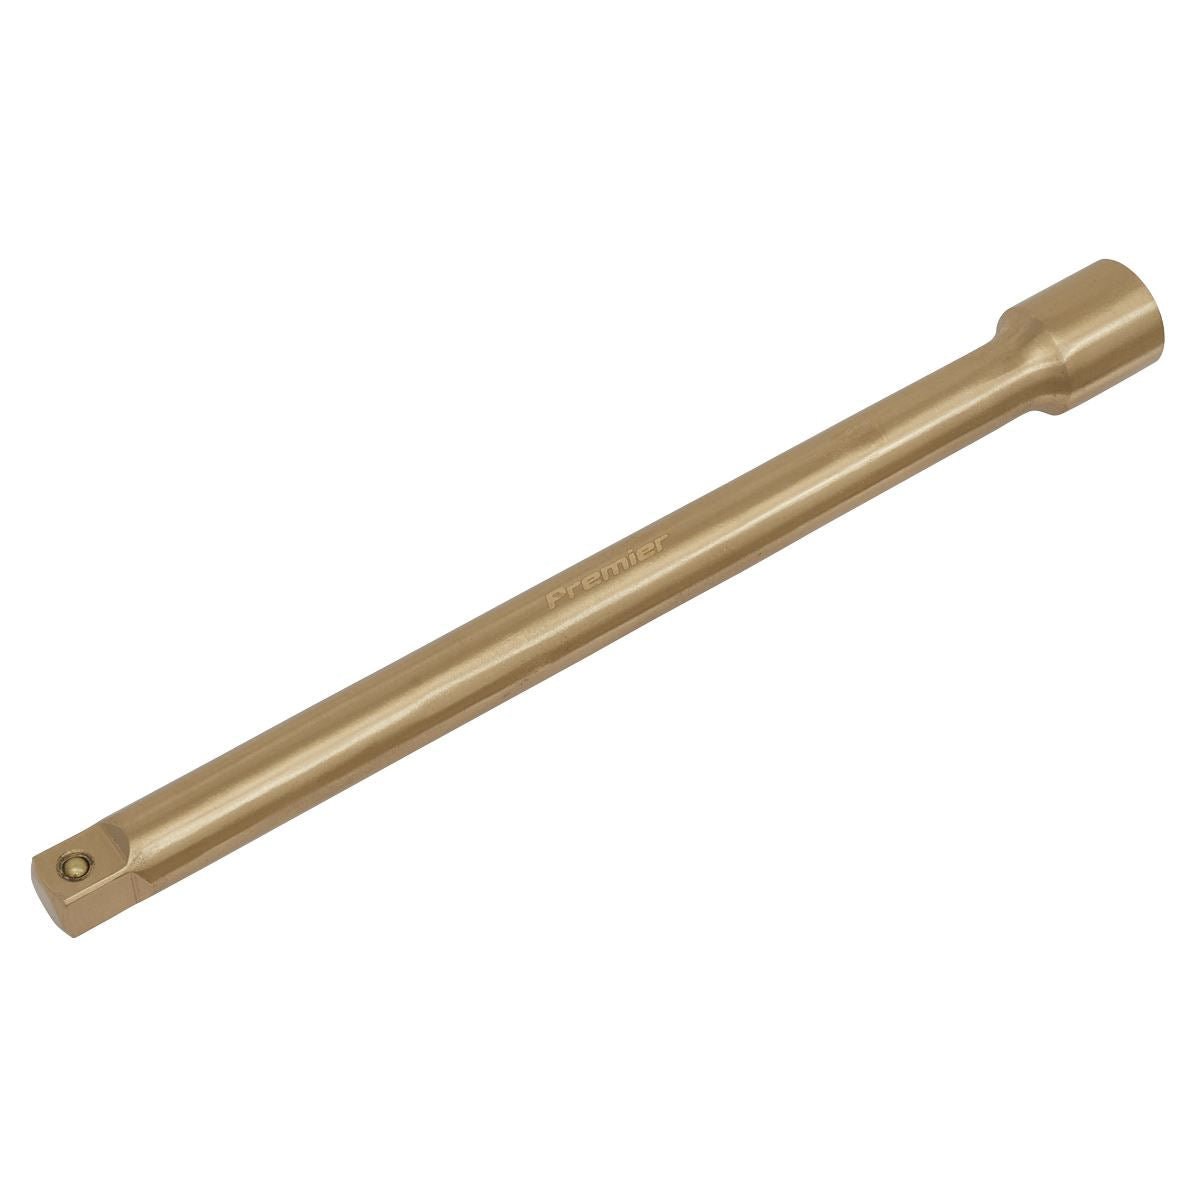 Sealey Premier Extension Bar 1/2"Sq Drive 250mm - Non-Sparking